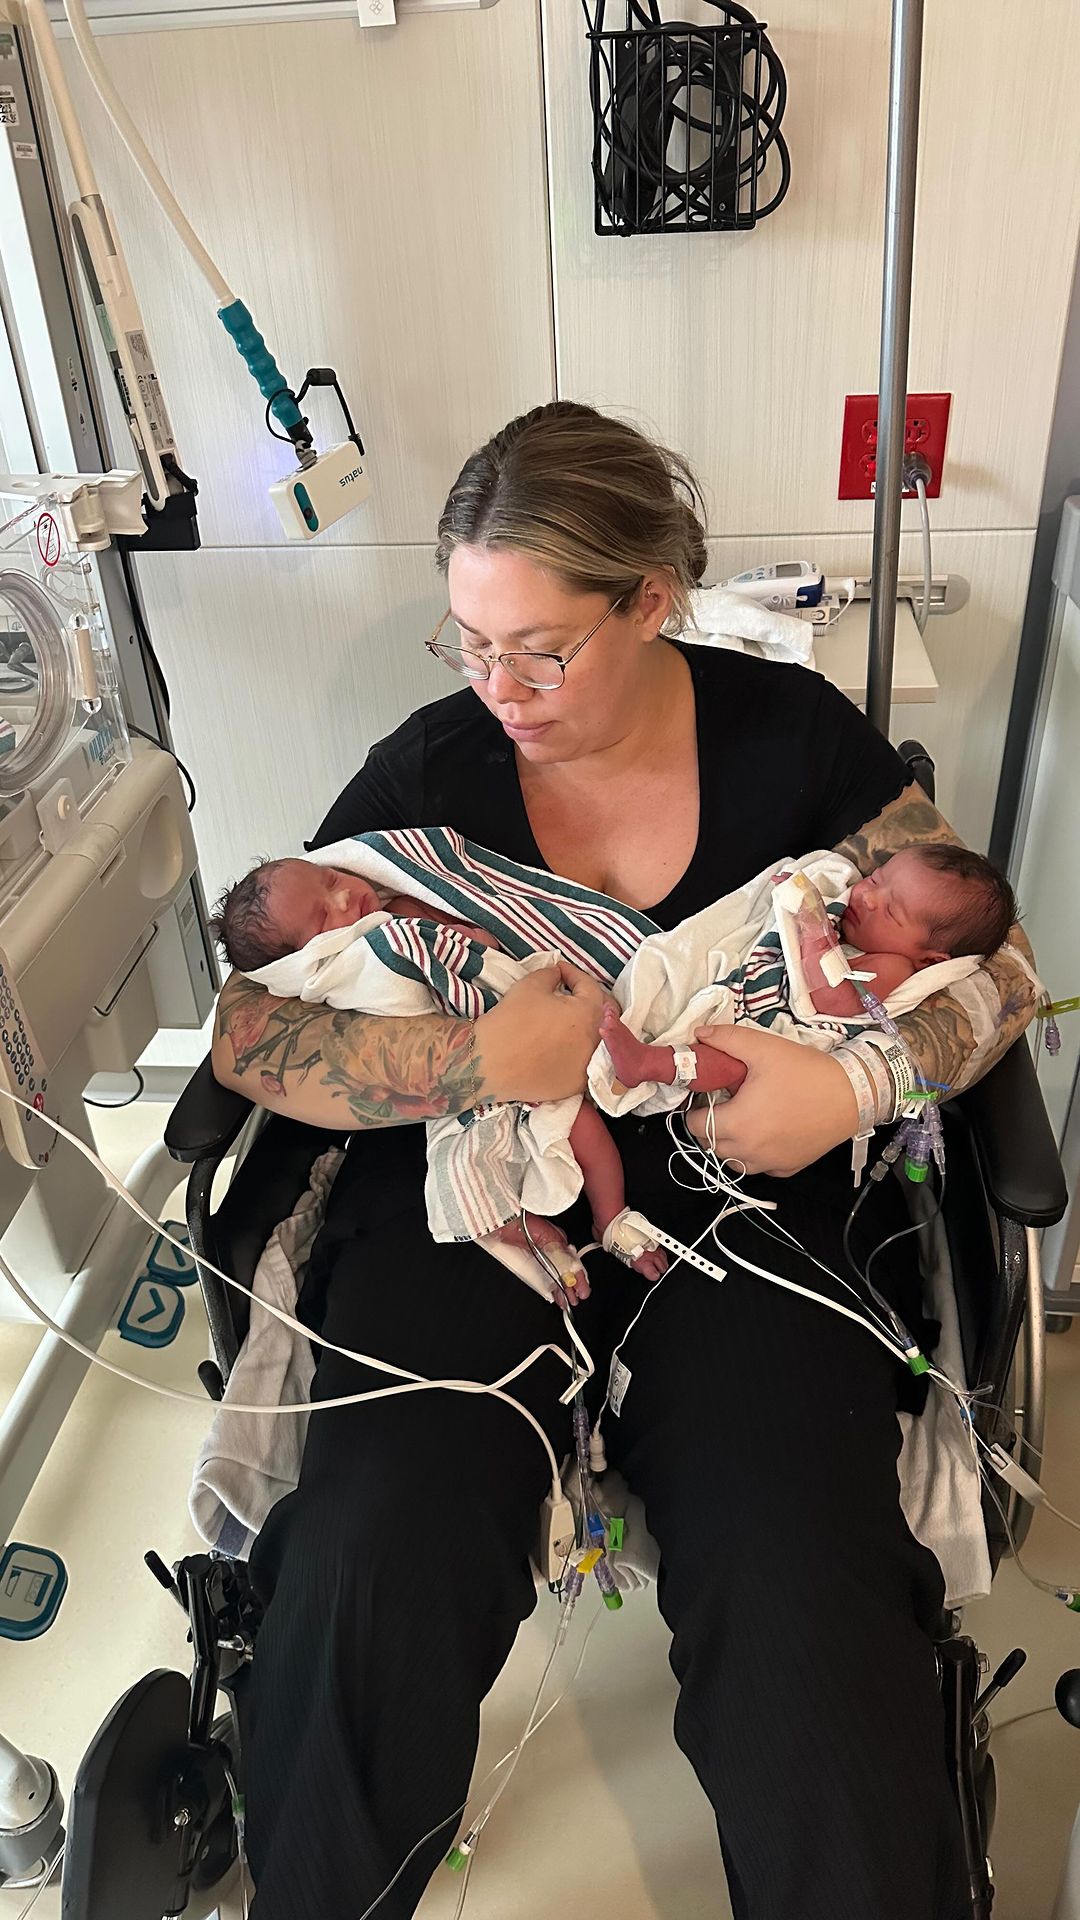 The MTV star has opened up about her traumatic twin birth experience and the difficulties of Valley being in the NICU